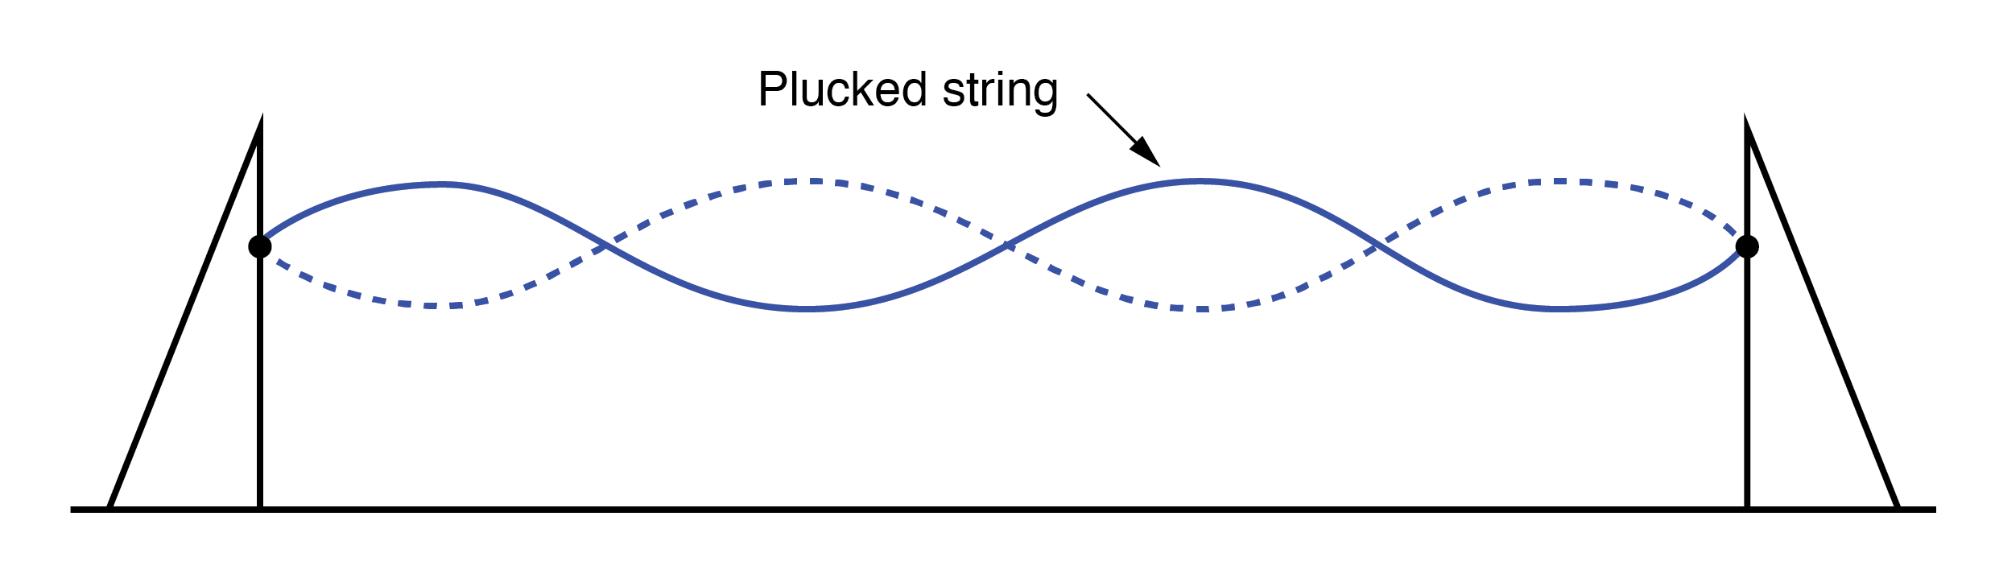 Standing waves on a plucked string